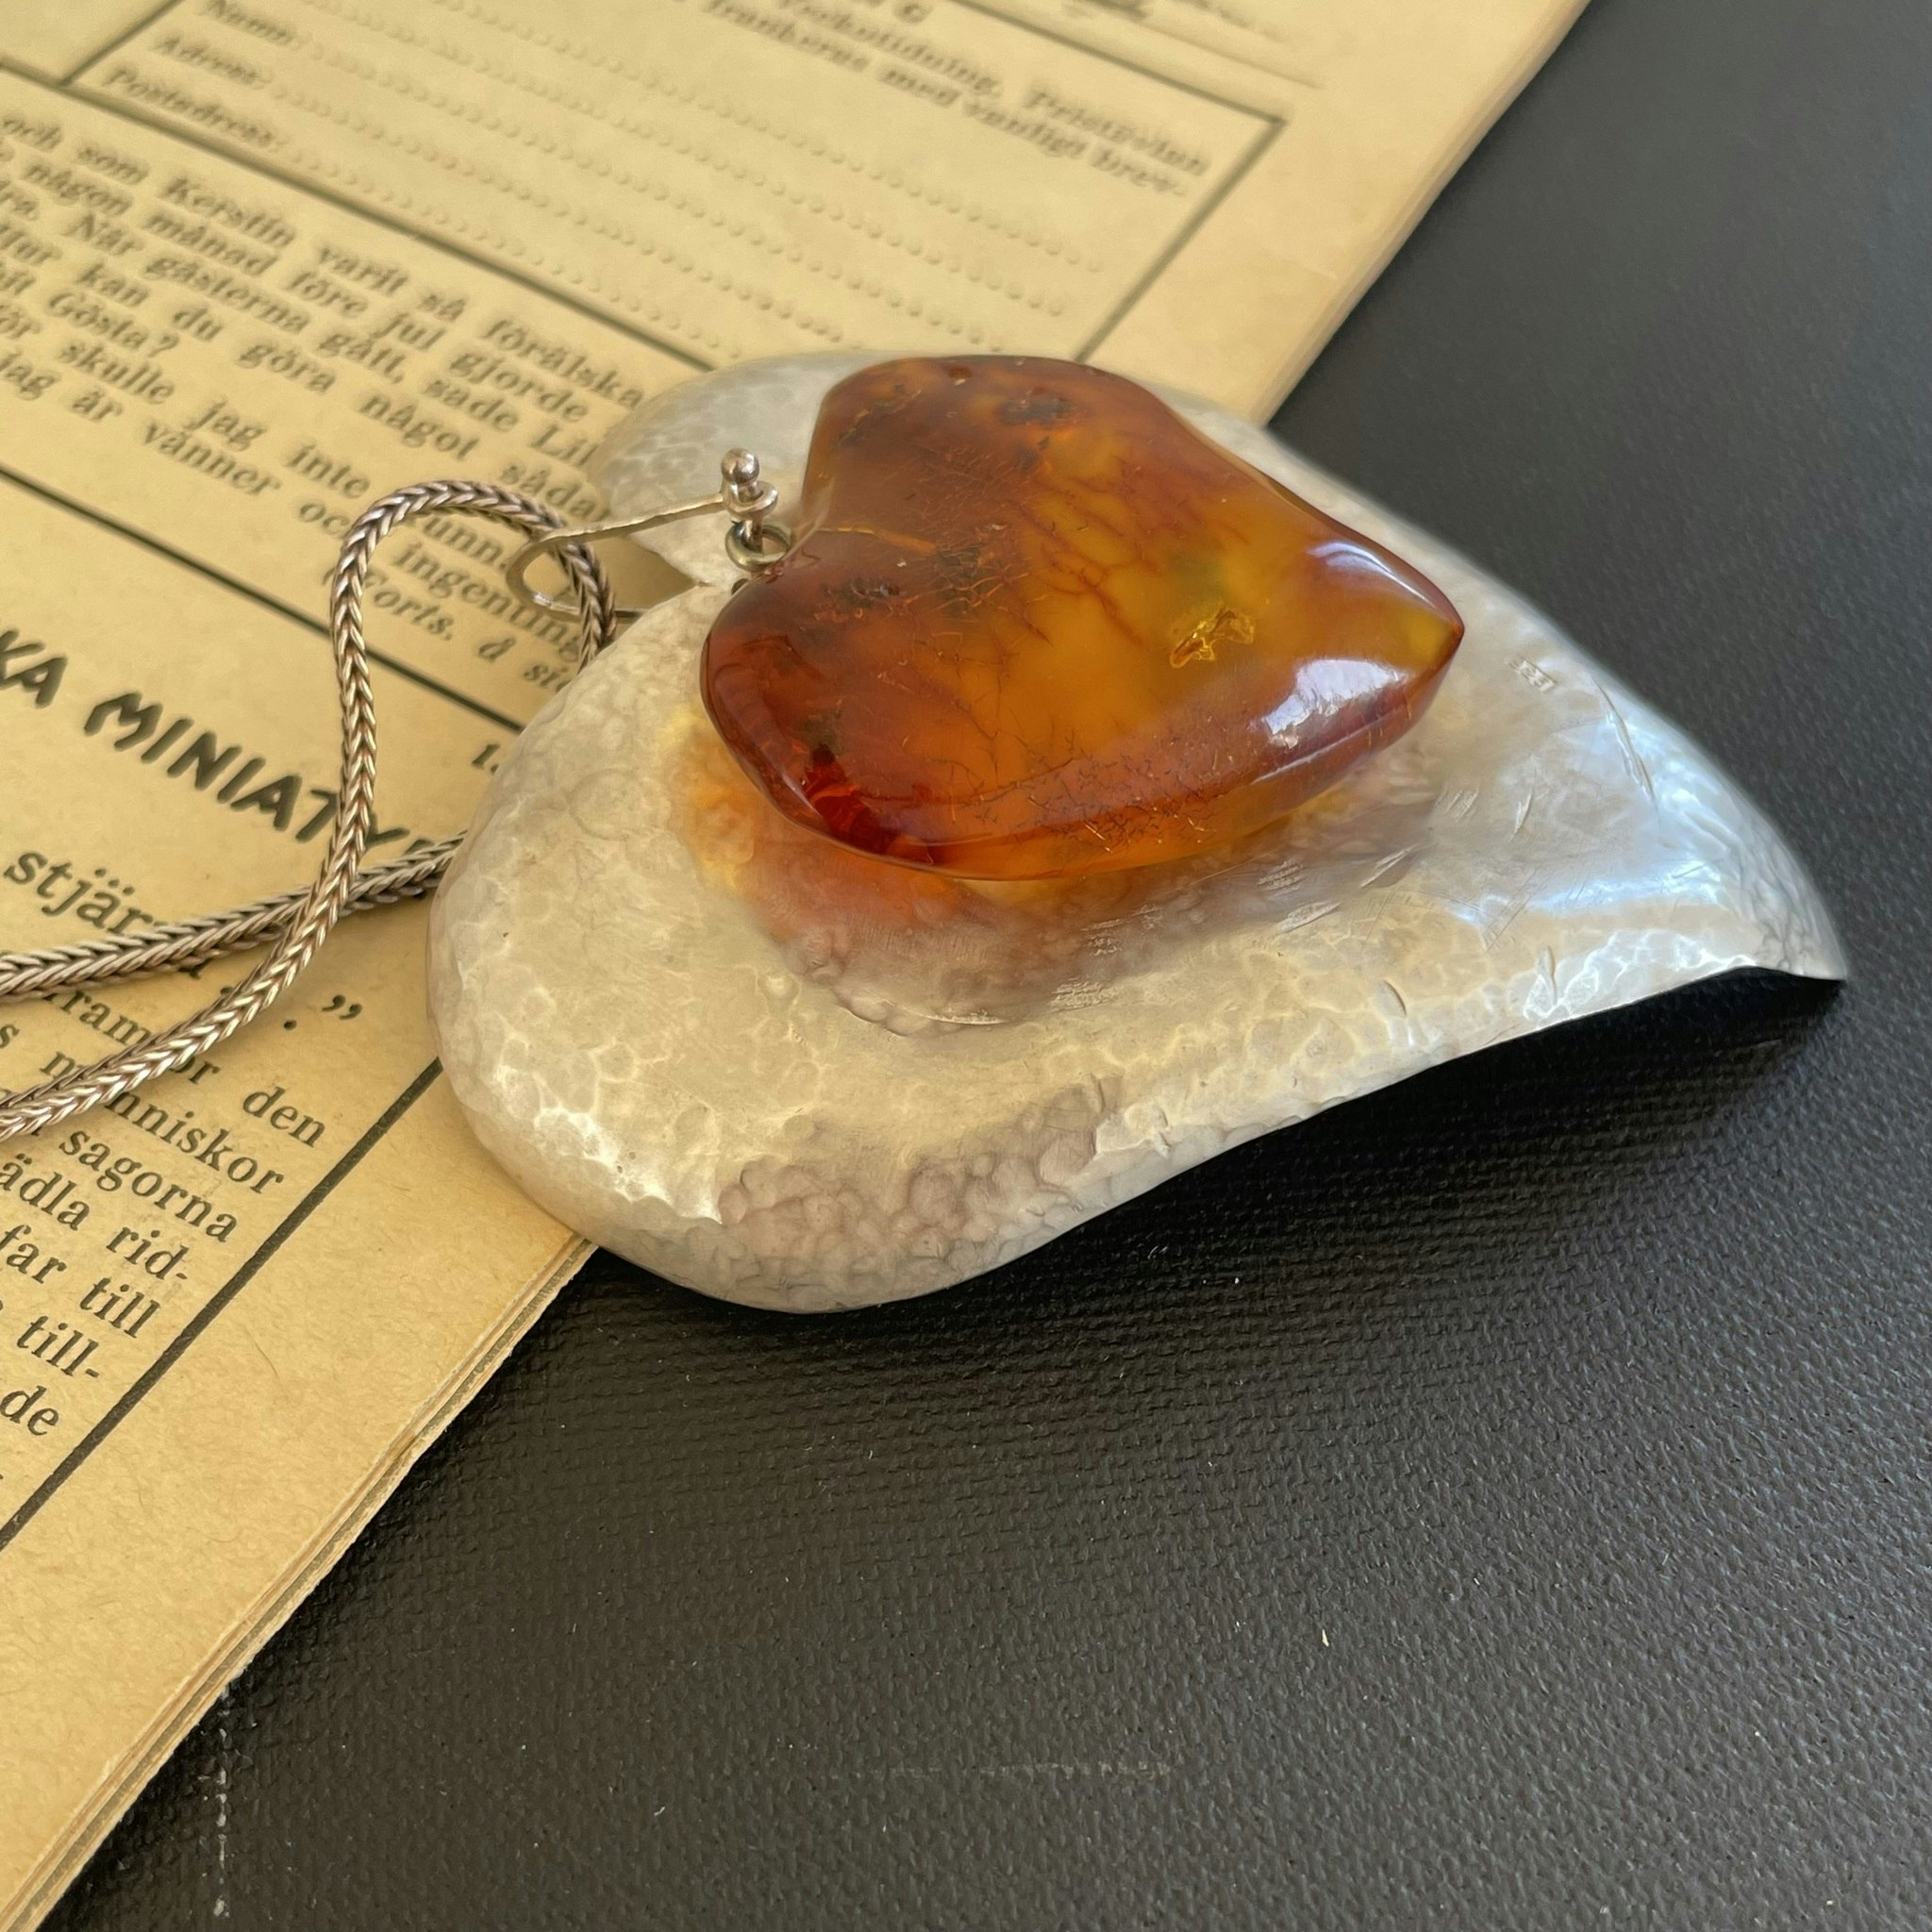 Unique Scandinavian design sterling silver pendent heart with baltic amber huge